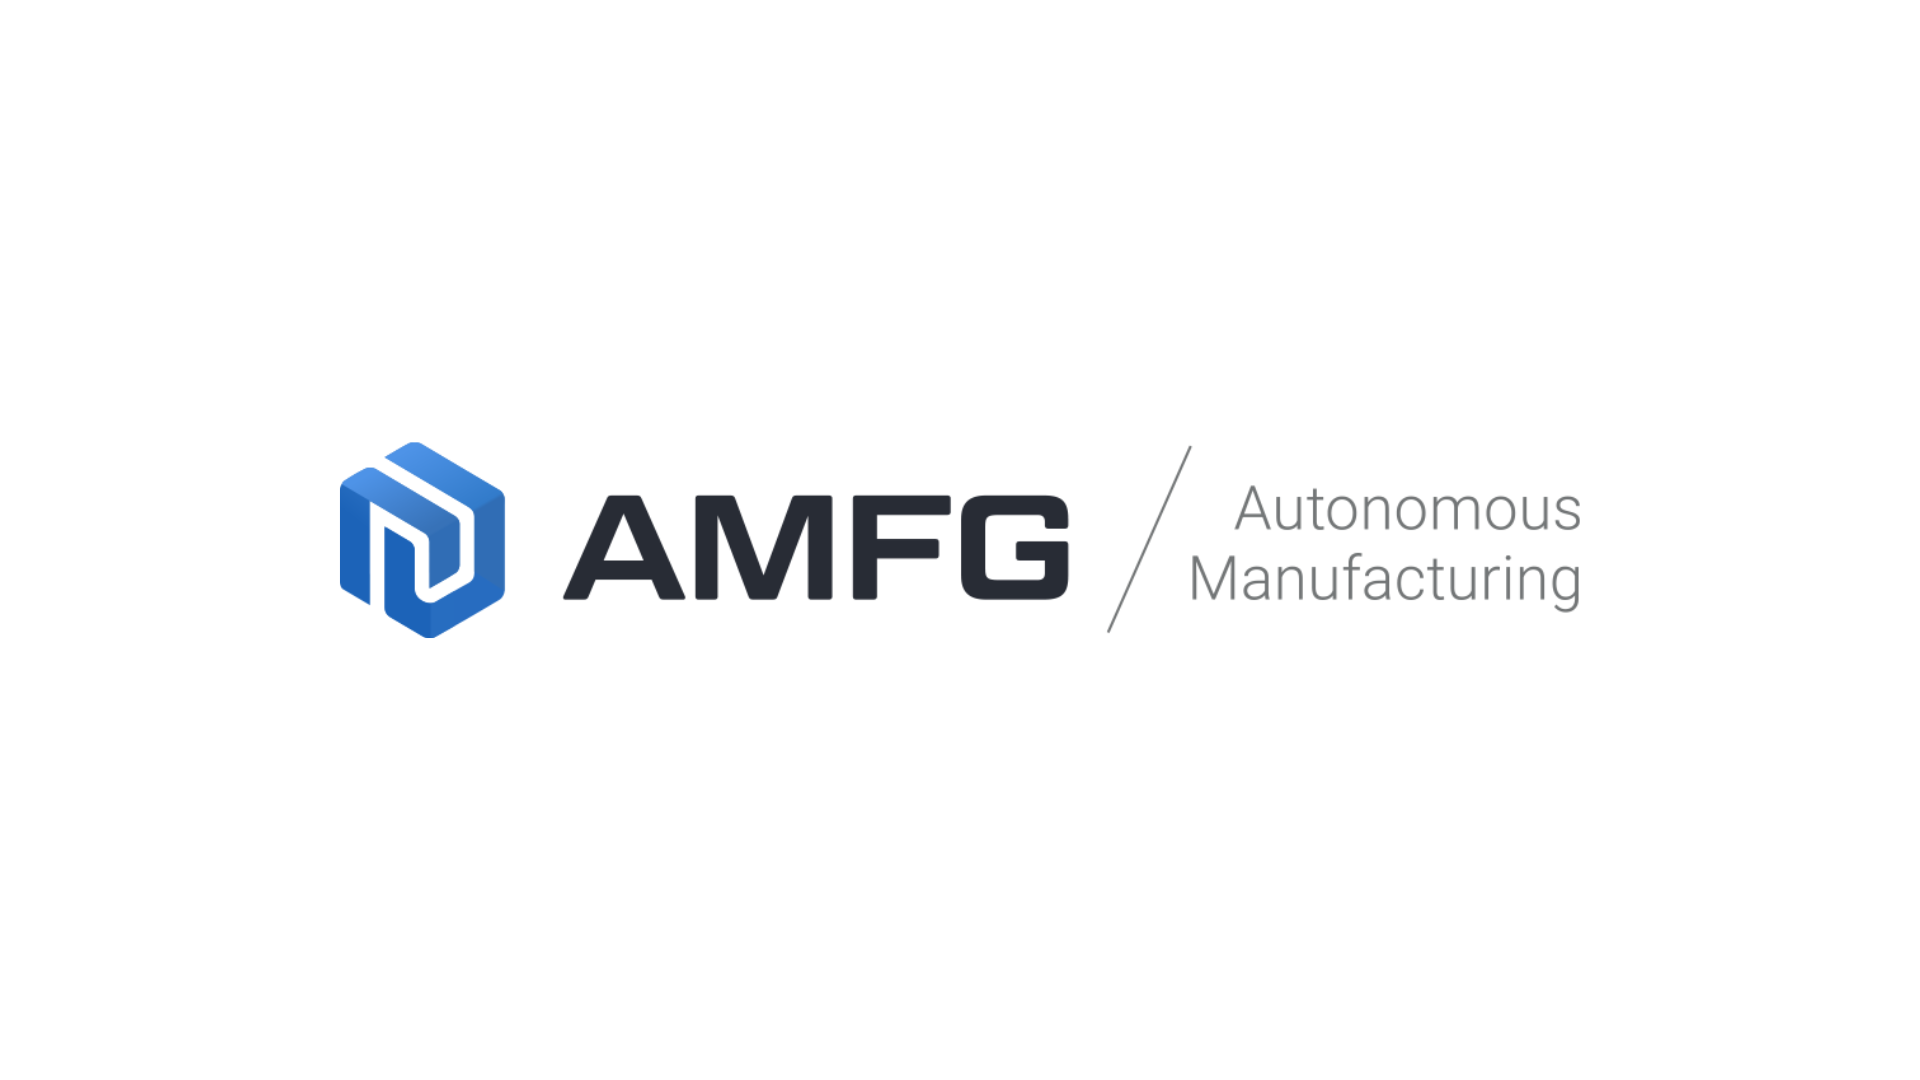 AMFG Corp. has secured $8.5M in funding led by Intel Capital to further catapult their spot in fully autonomous manufacturing.